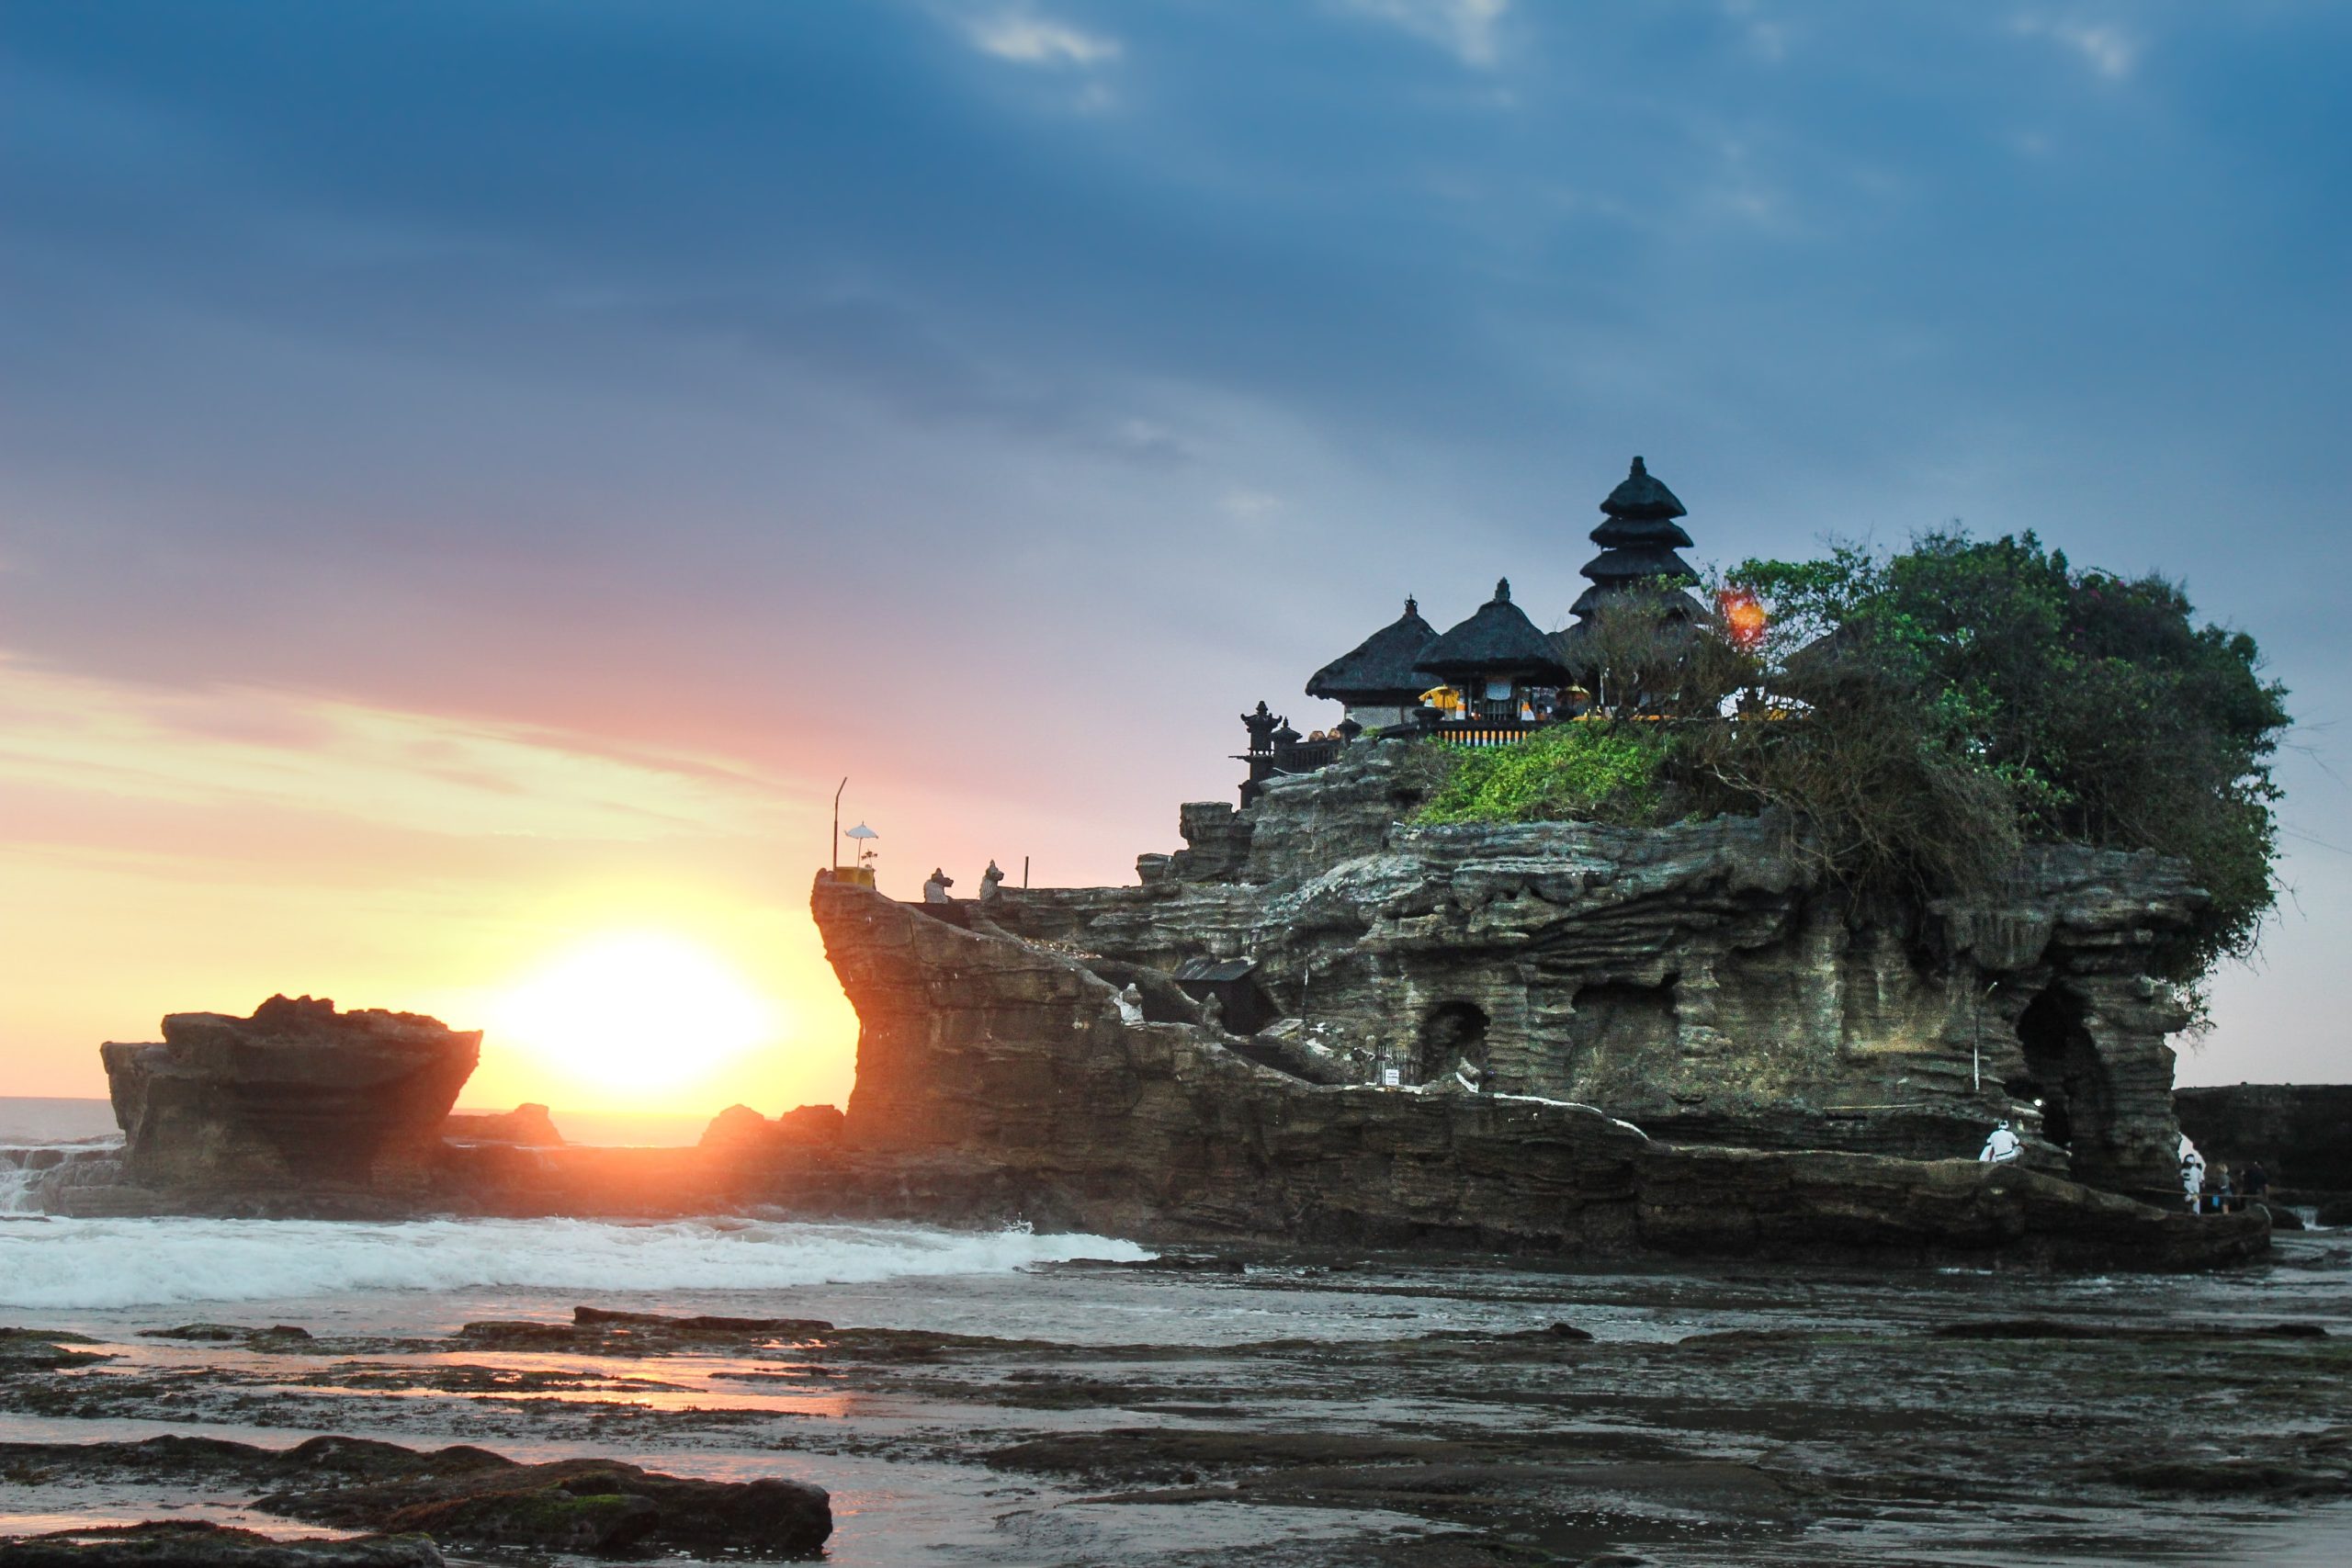 island with a temple in Bali